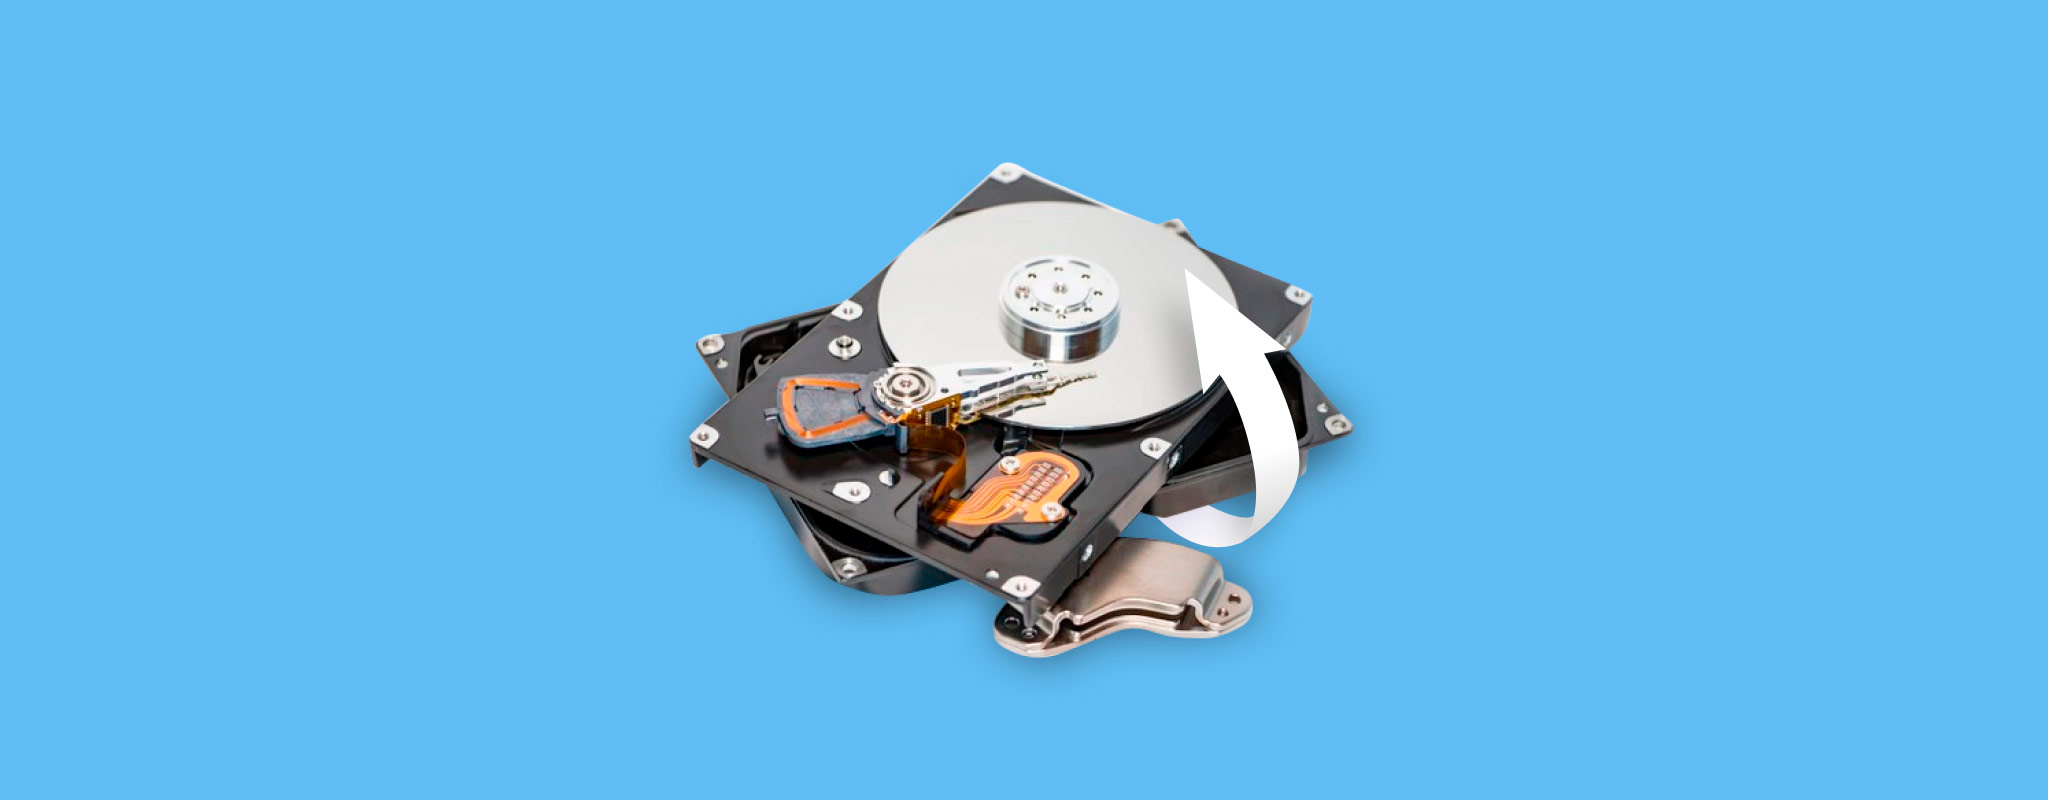 Recover data from dead hard drive